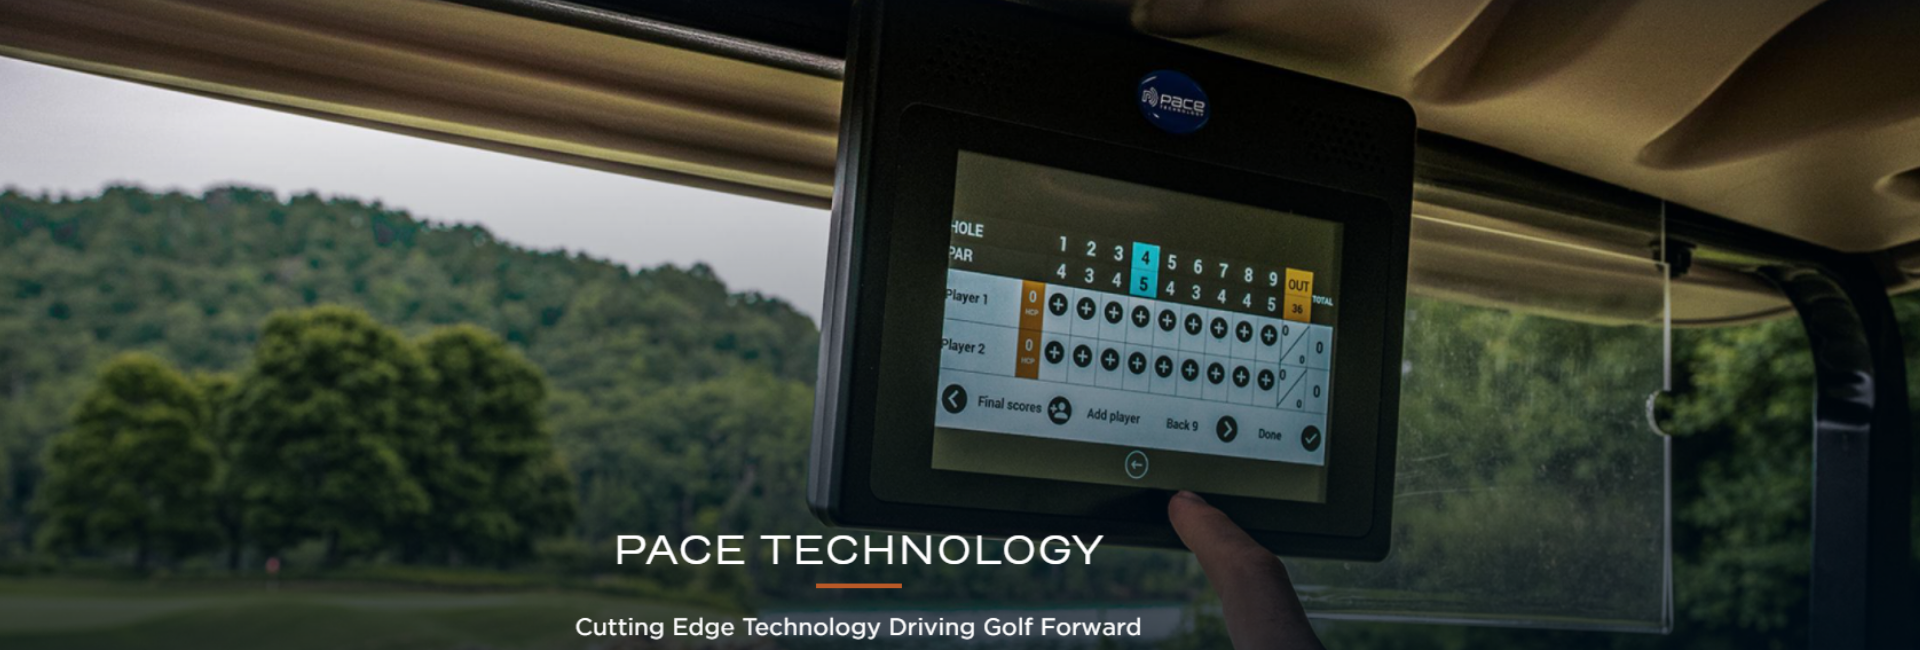 Pace Technology 7 (Text Only GPS)